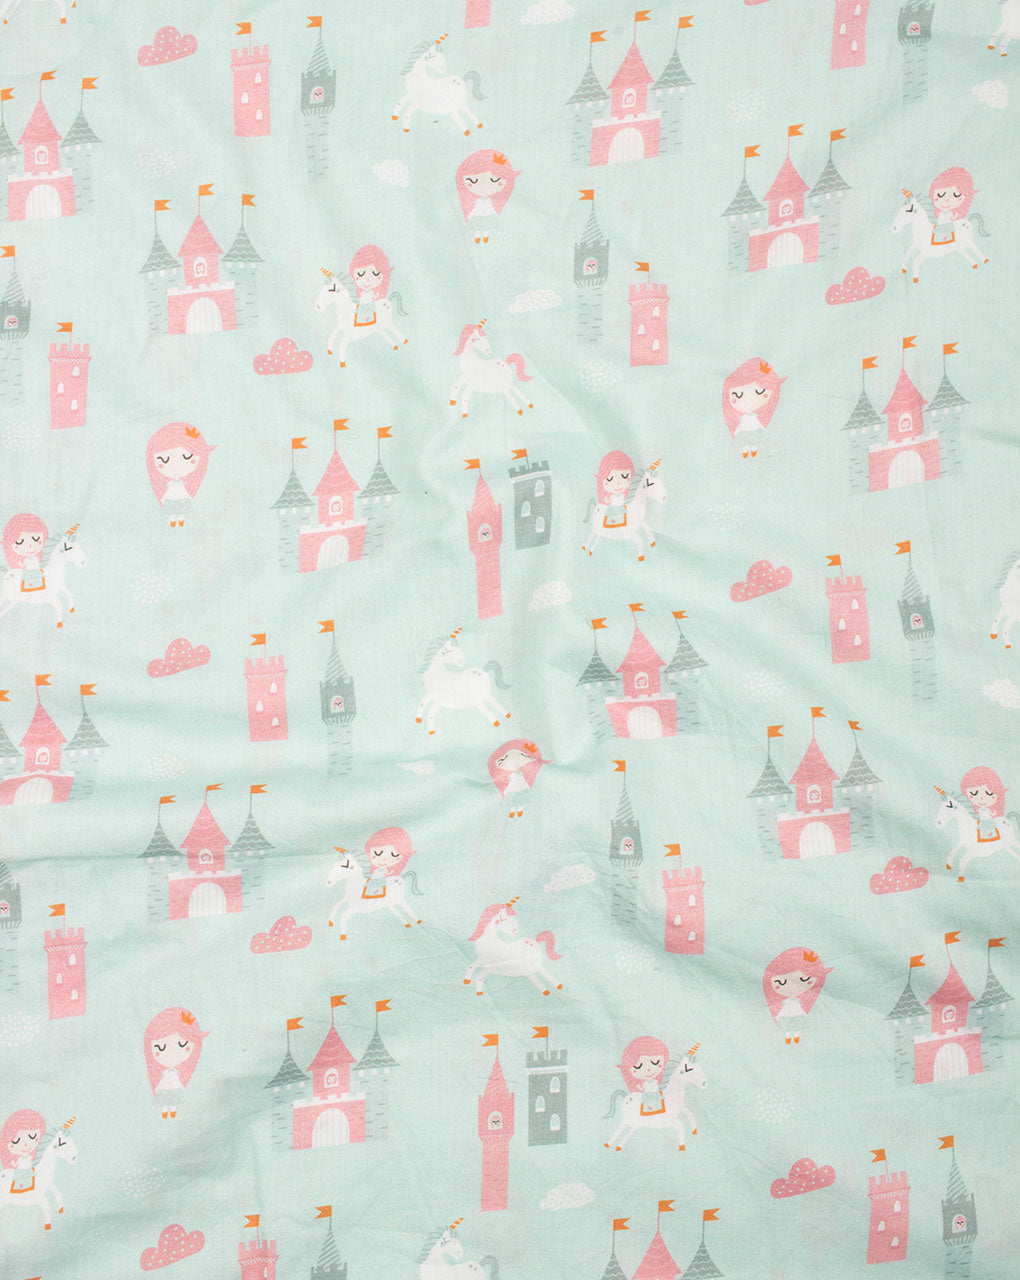 Turquoise White Objects Kids Digital Print Cotton Fabric - Fabriclore.com